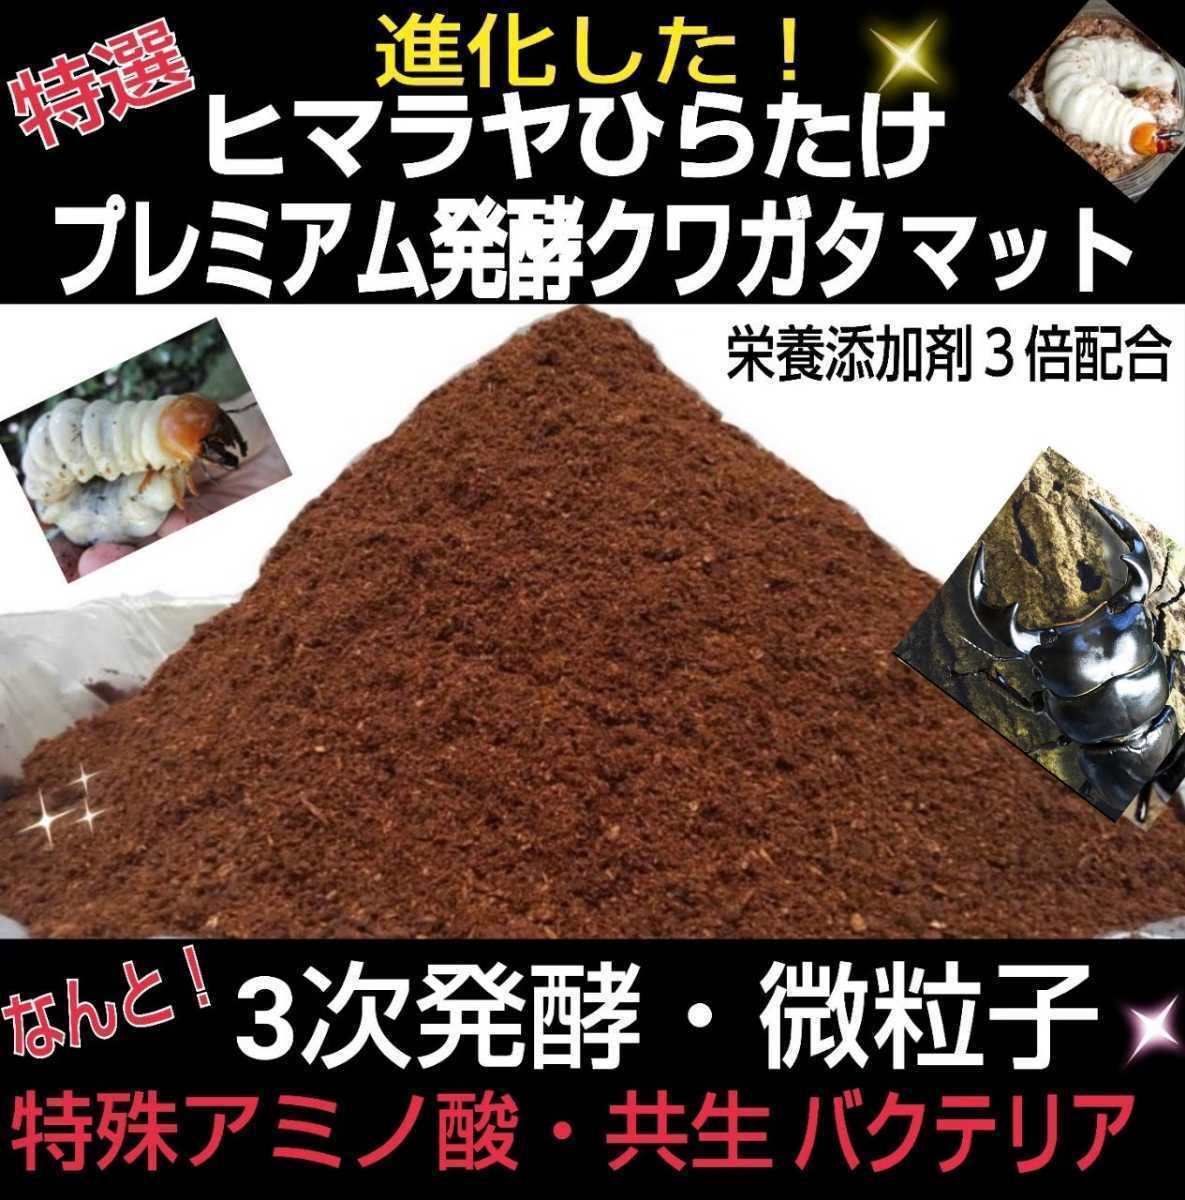  evolved! premium 3 next departure . stag beetle mat! nutrition addition agent * symbiosis bacteria 3 times combination * Miyama * saw * rainbow color * common ta* Anne te. on a grand scale become 